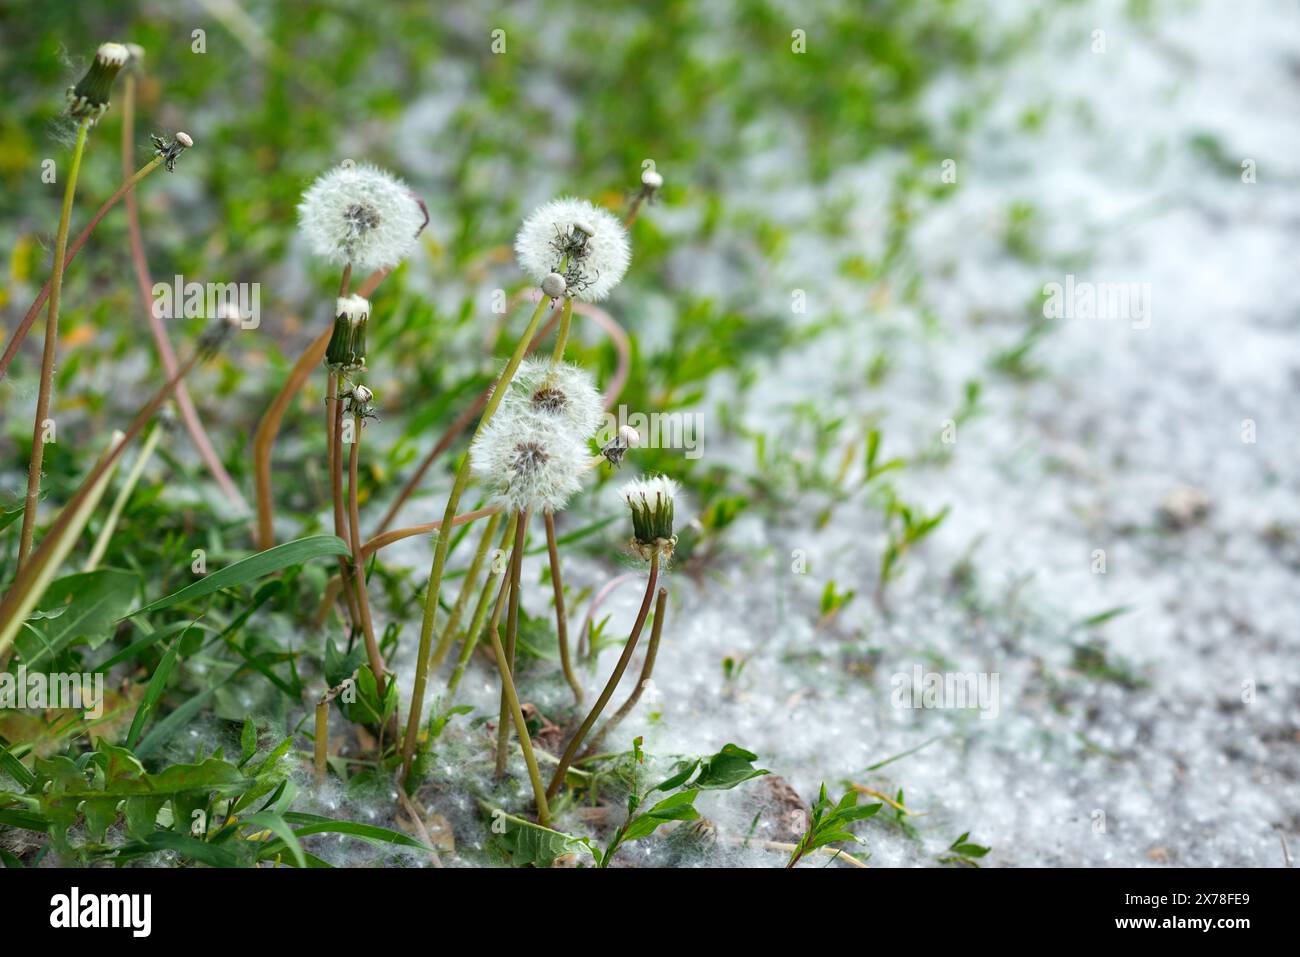 Poplar fluff lying on the various green grass with blooming dandelions on a hillside. Stock Photo